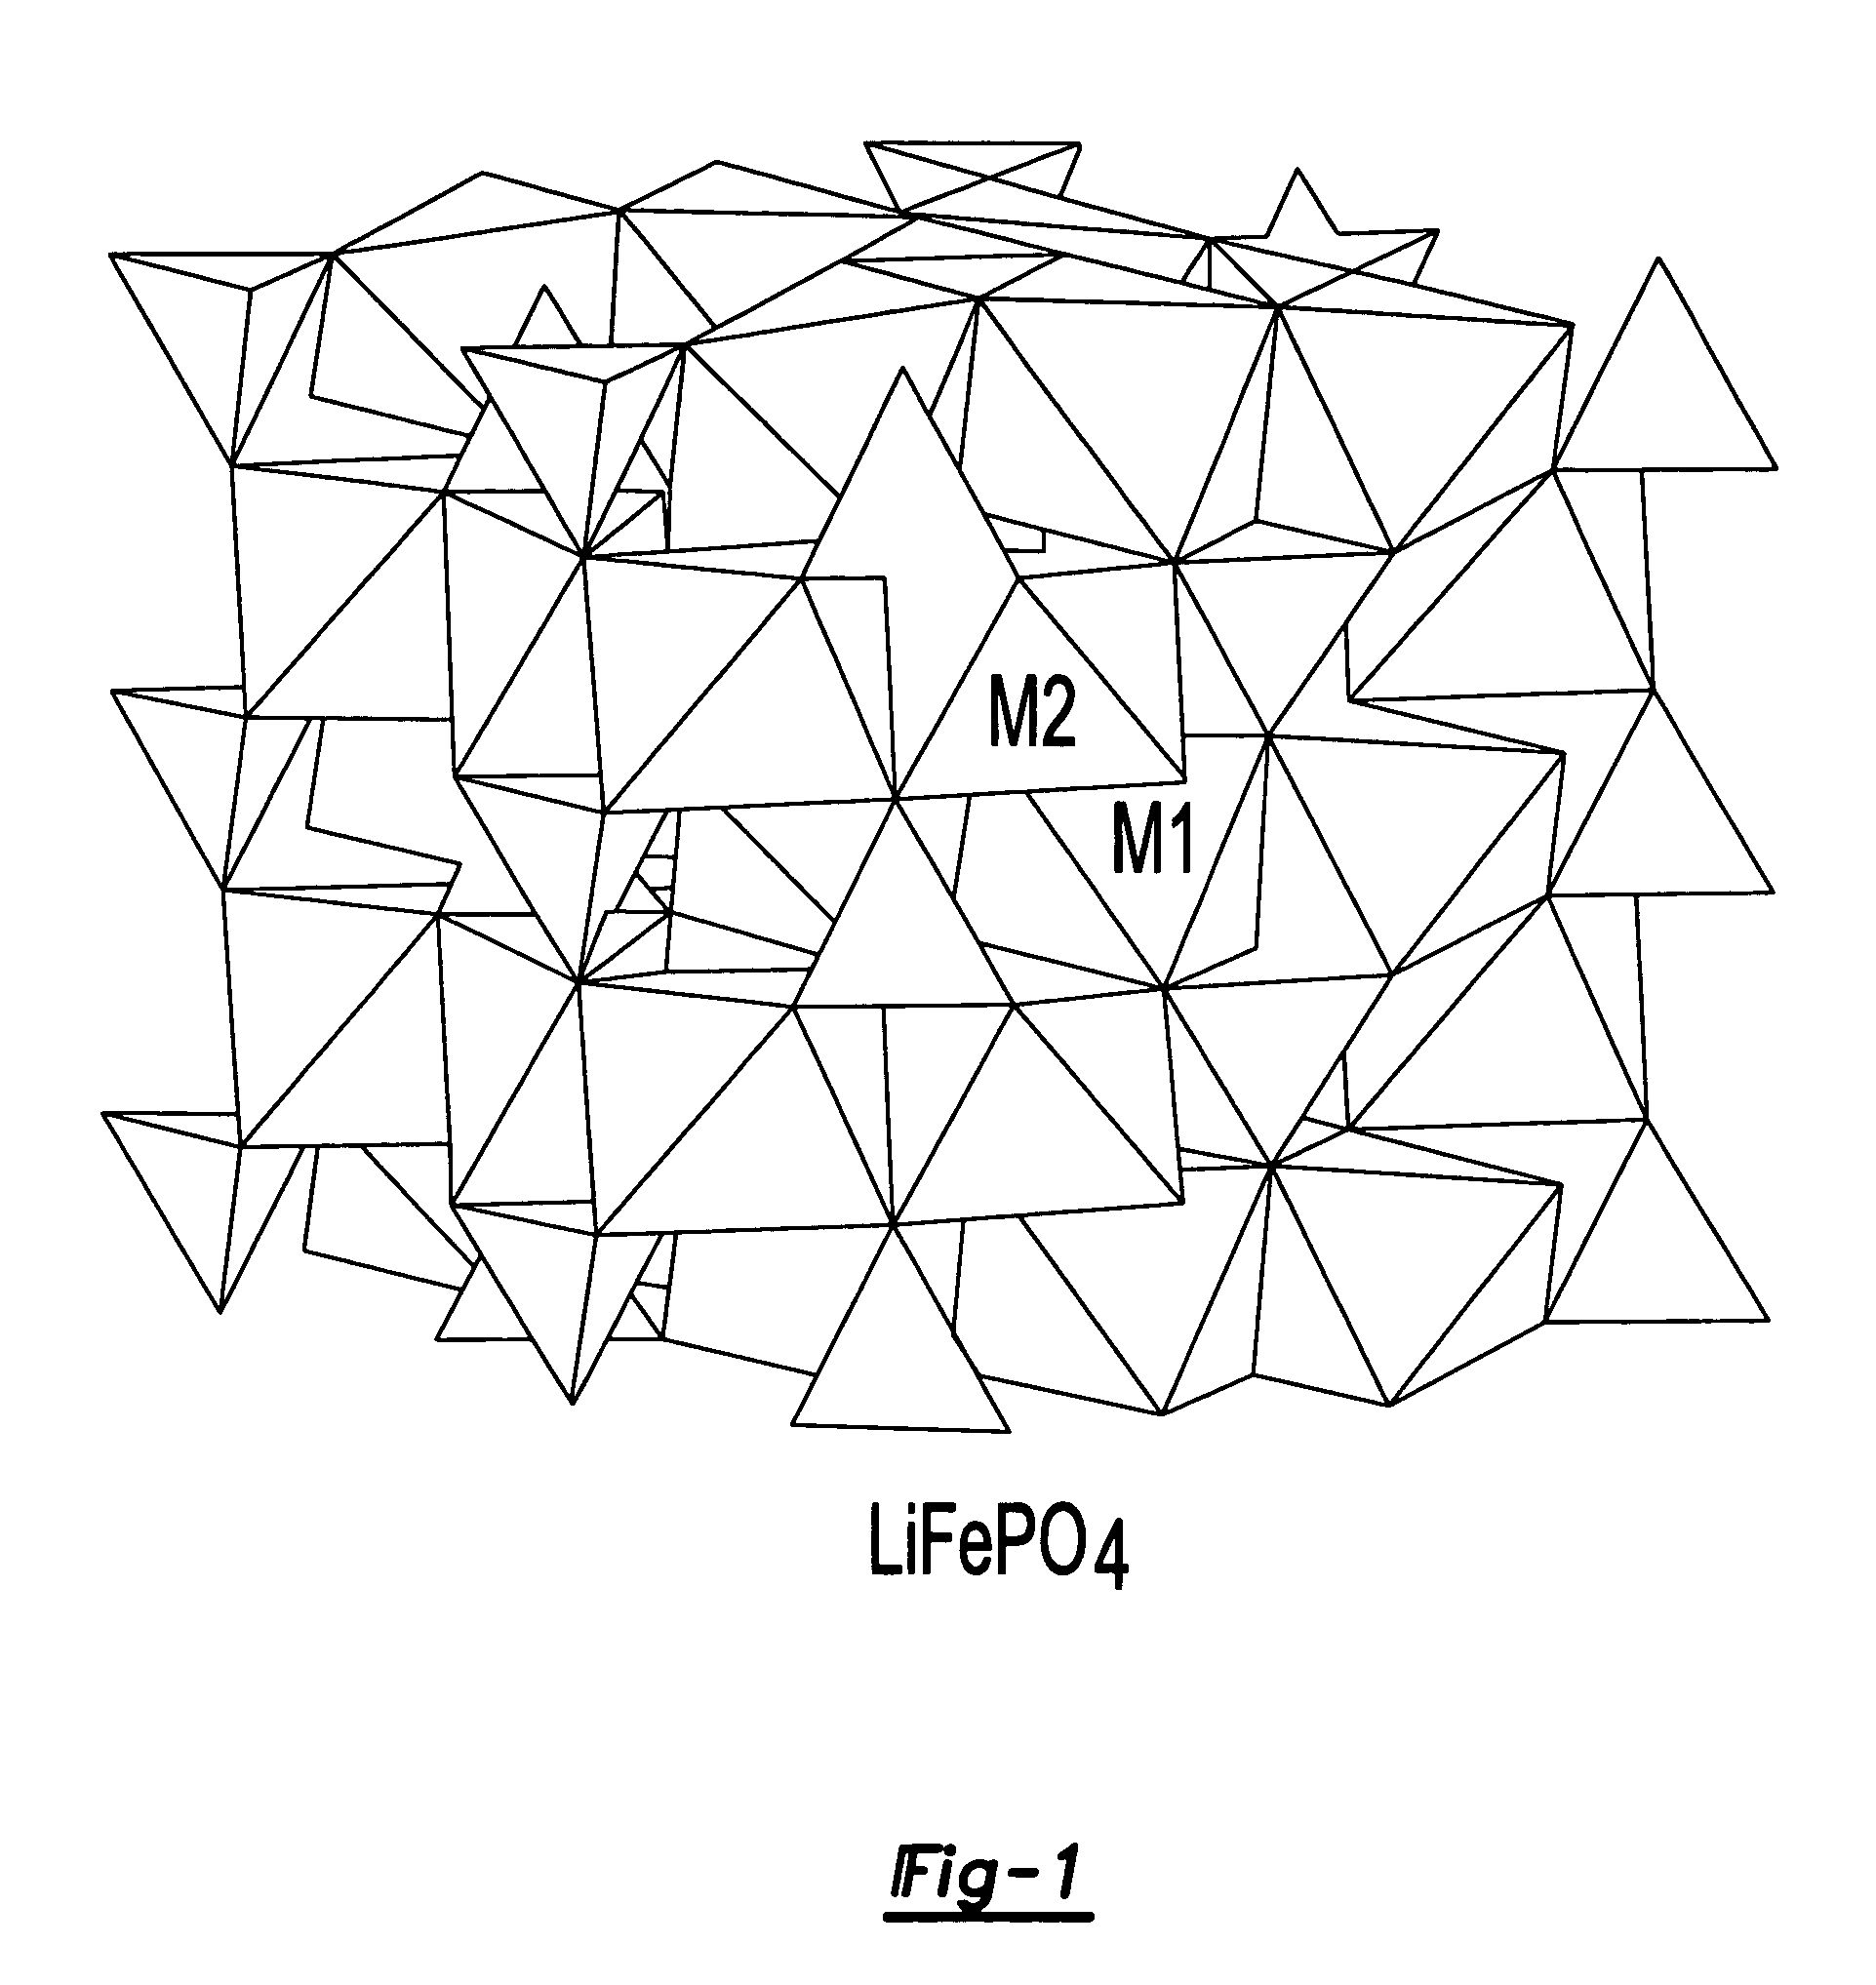 Electrode materials for electrochemical cells